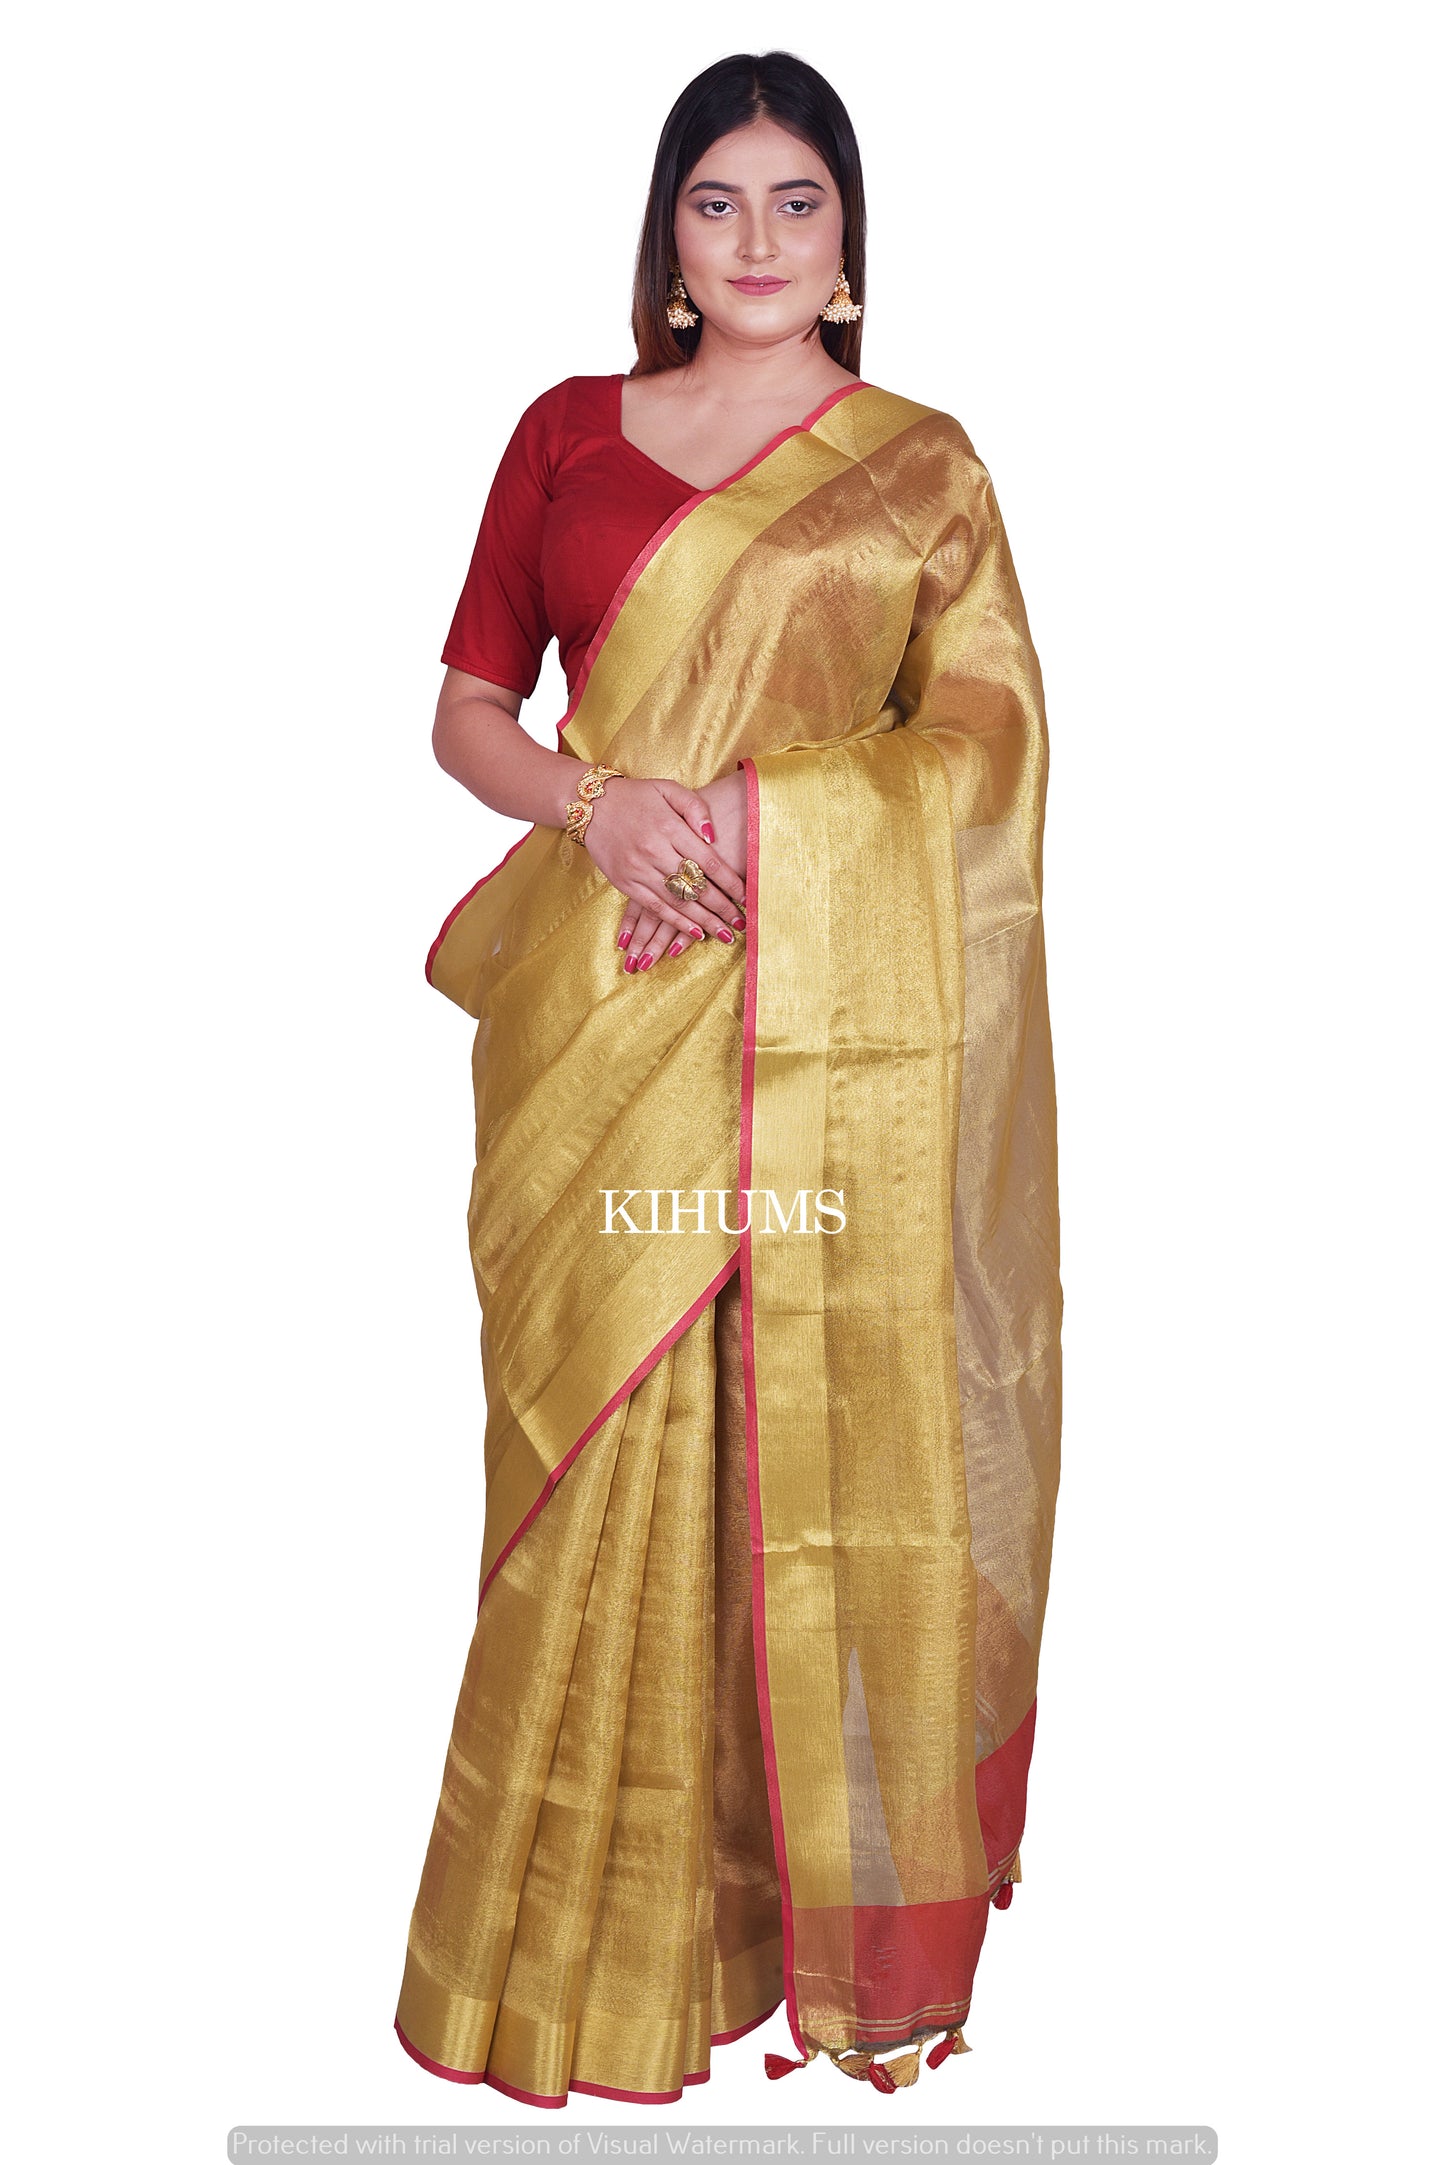 Golden Tissue Linen Saree with Contrast Red Blouse | Tissue Linen Saree | KIHUMS Saree